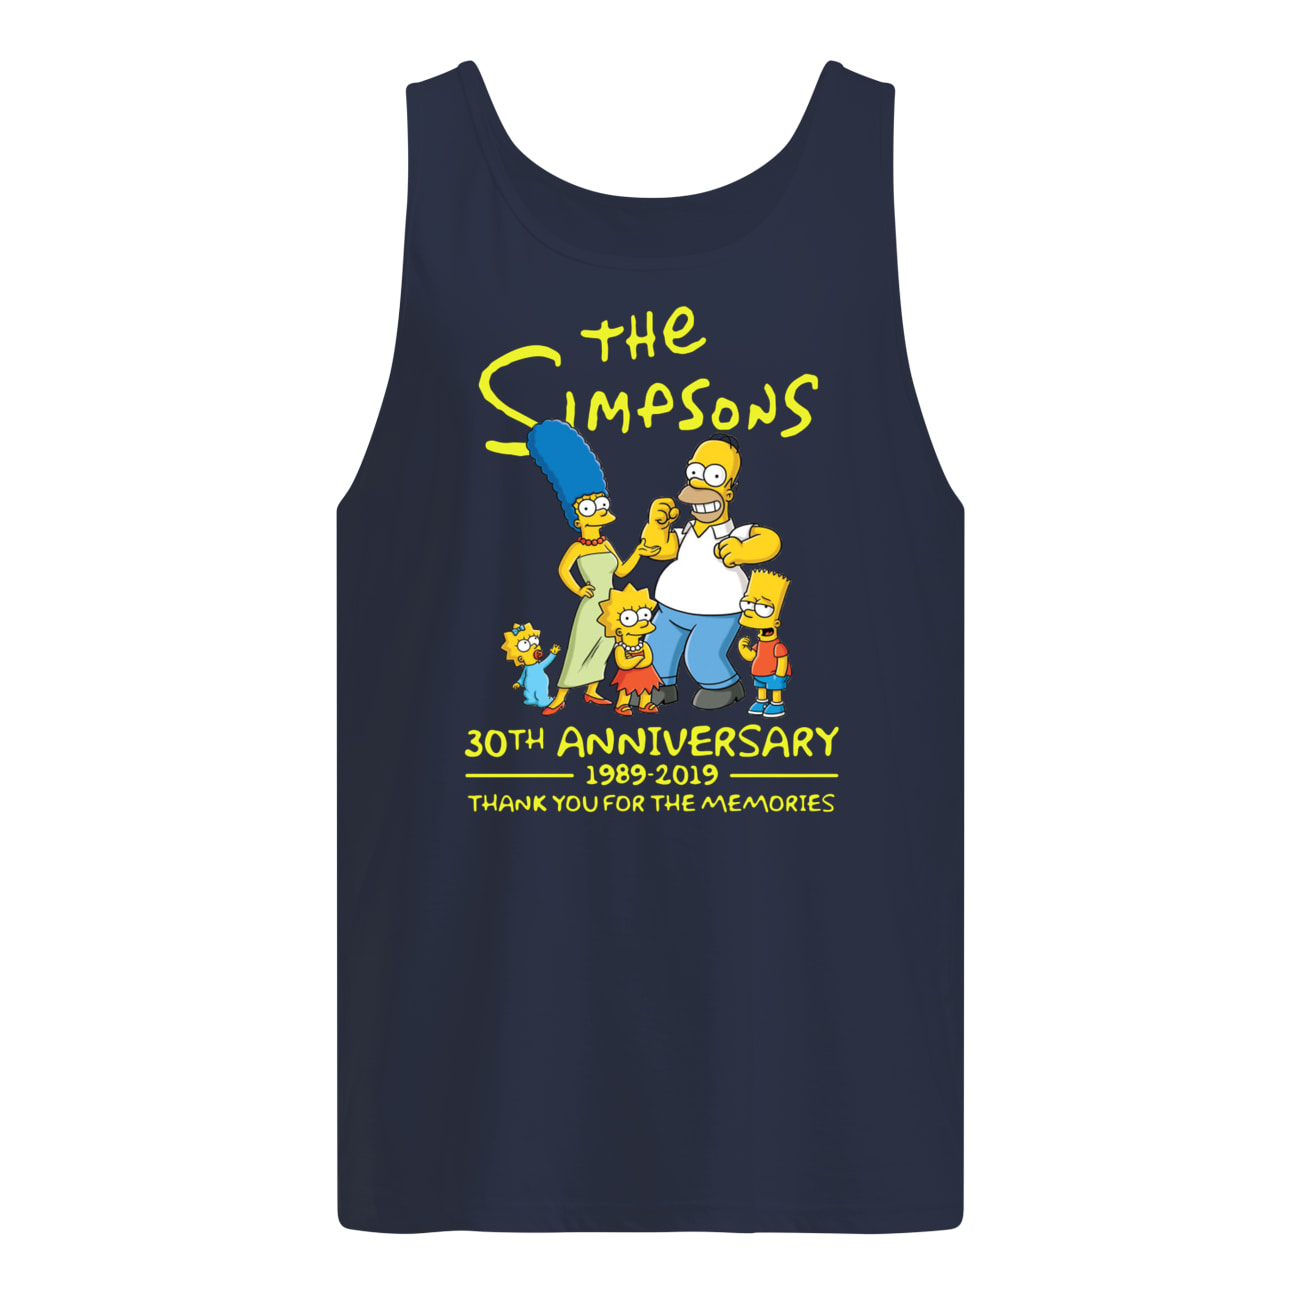 The simpsons 30th anniversary 1989-2019 thank you for memories tank top